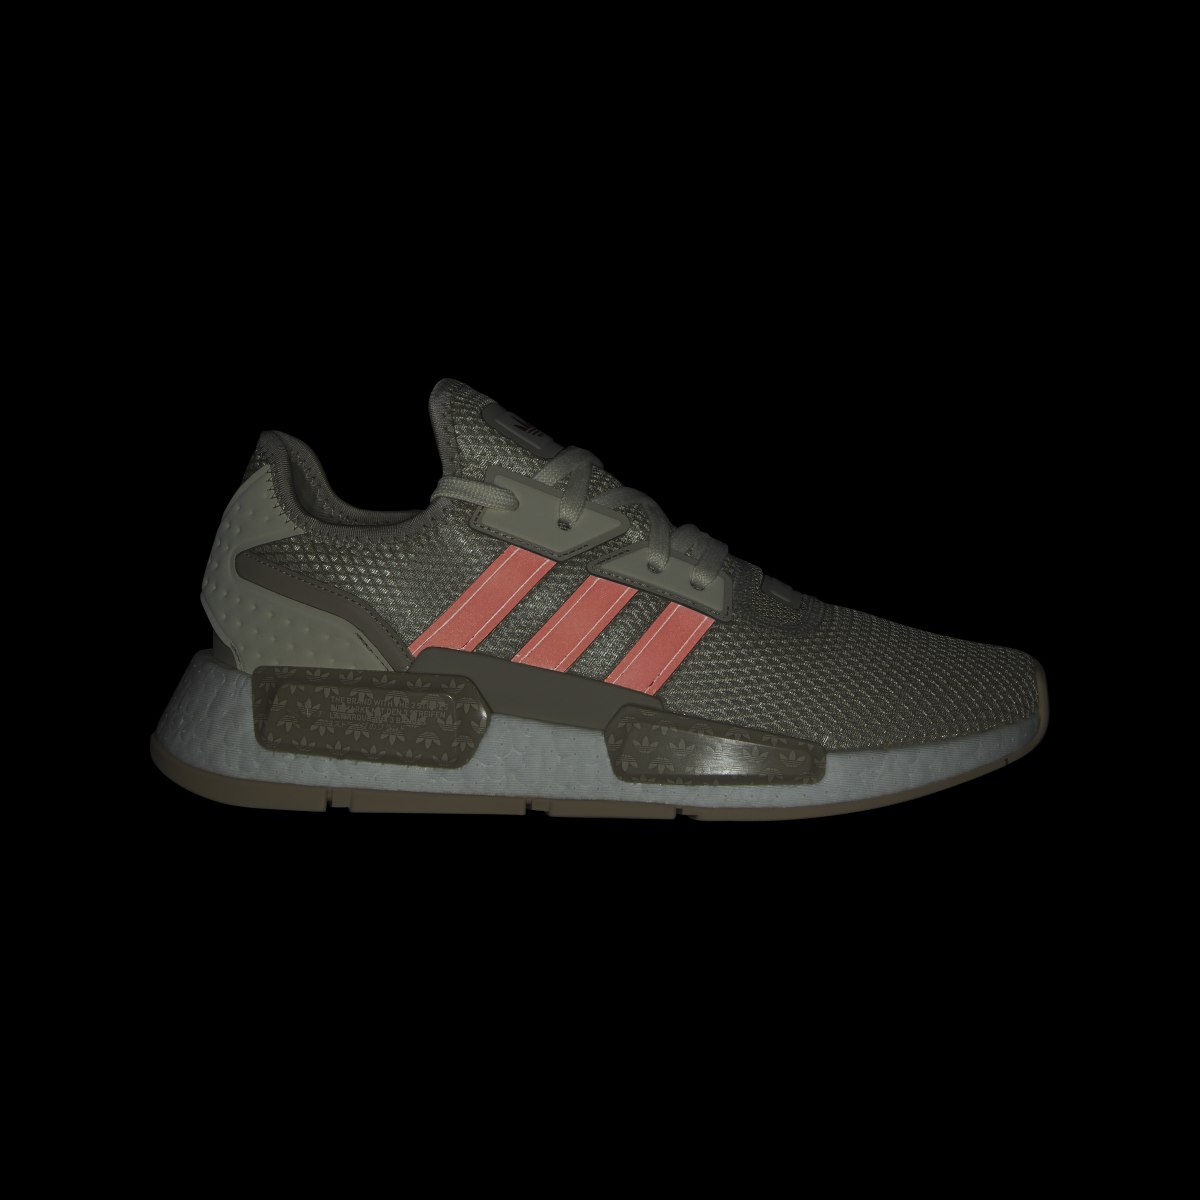 Adidas NMD_G1 Shoes. 4